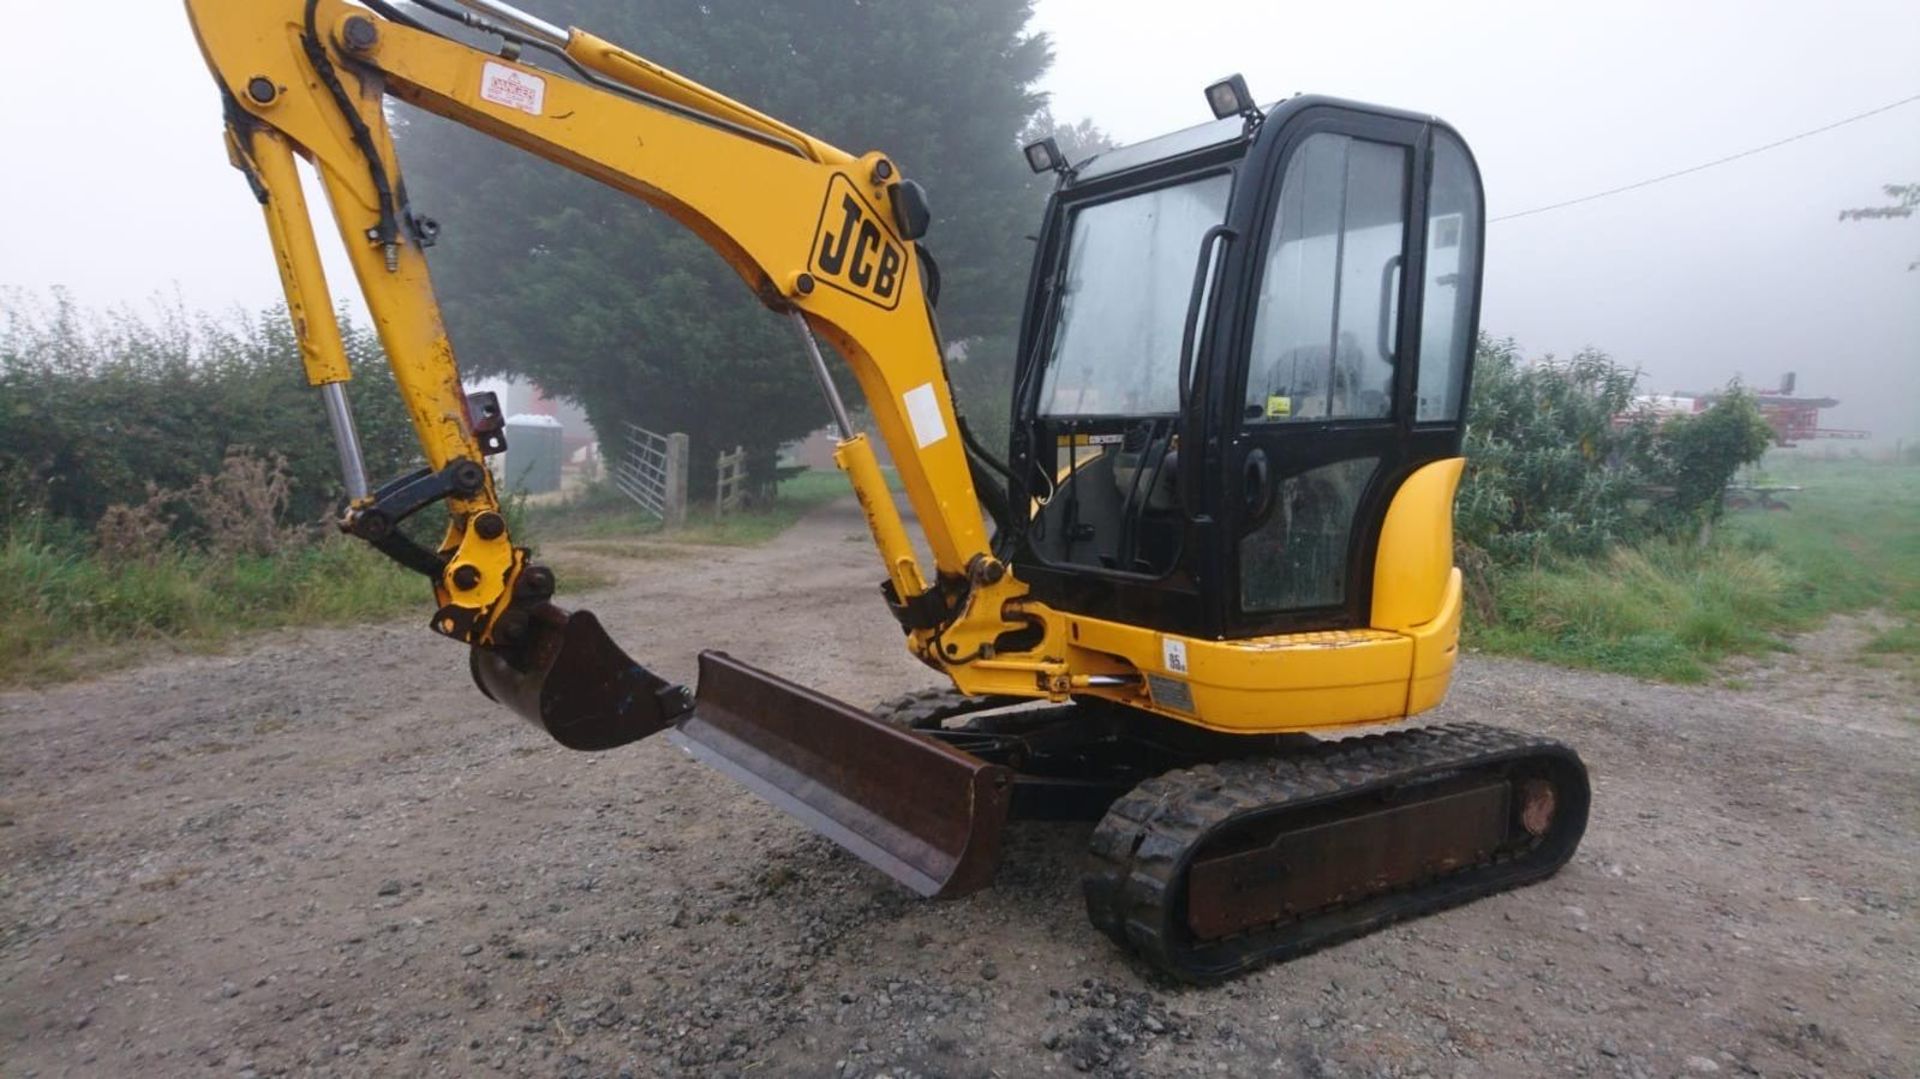 JCB SO8027z 2002 3T DIGGER 2385HOURS c/w BUCKETS &QUICK HITCH HEADSTOCK - Image 2 of 3